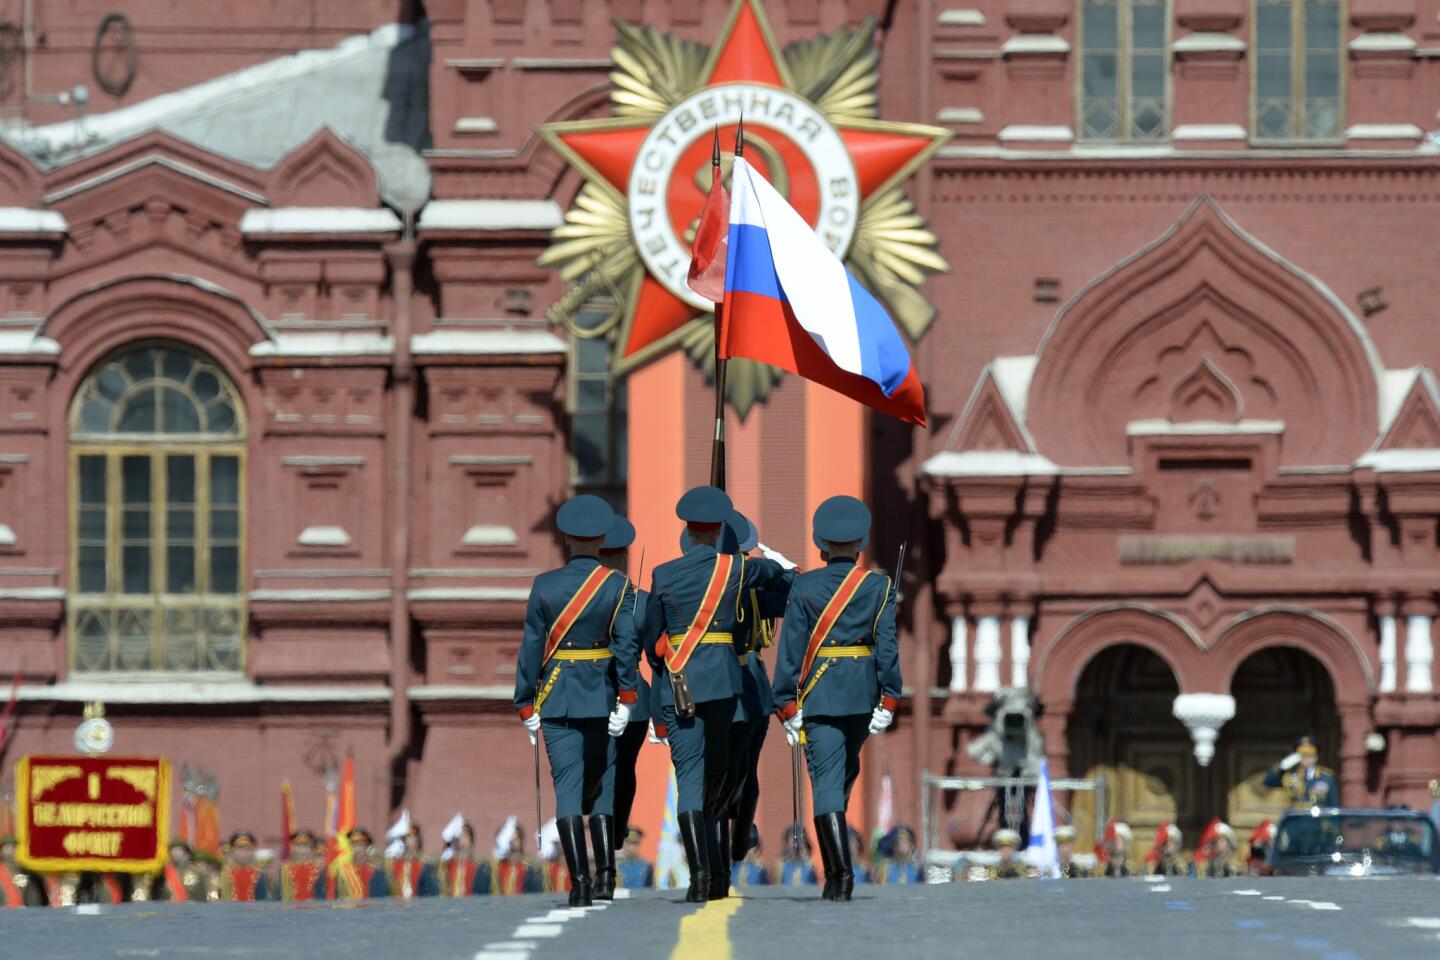 Russia's victory parade